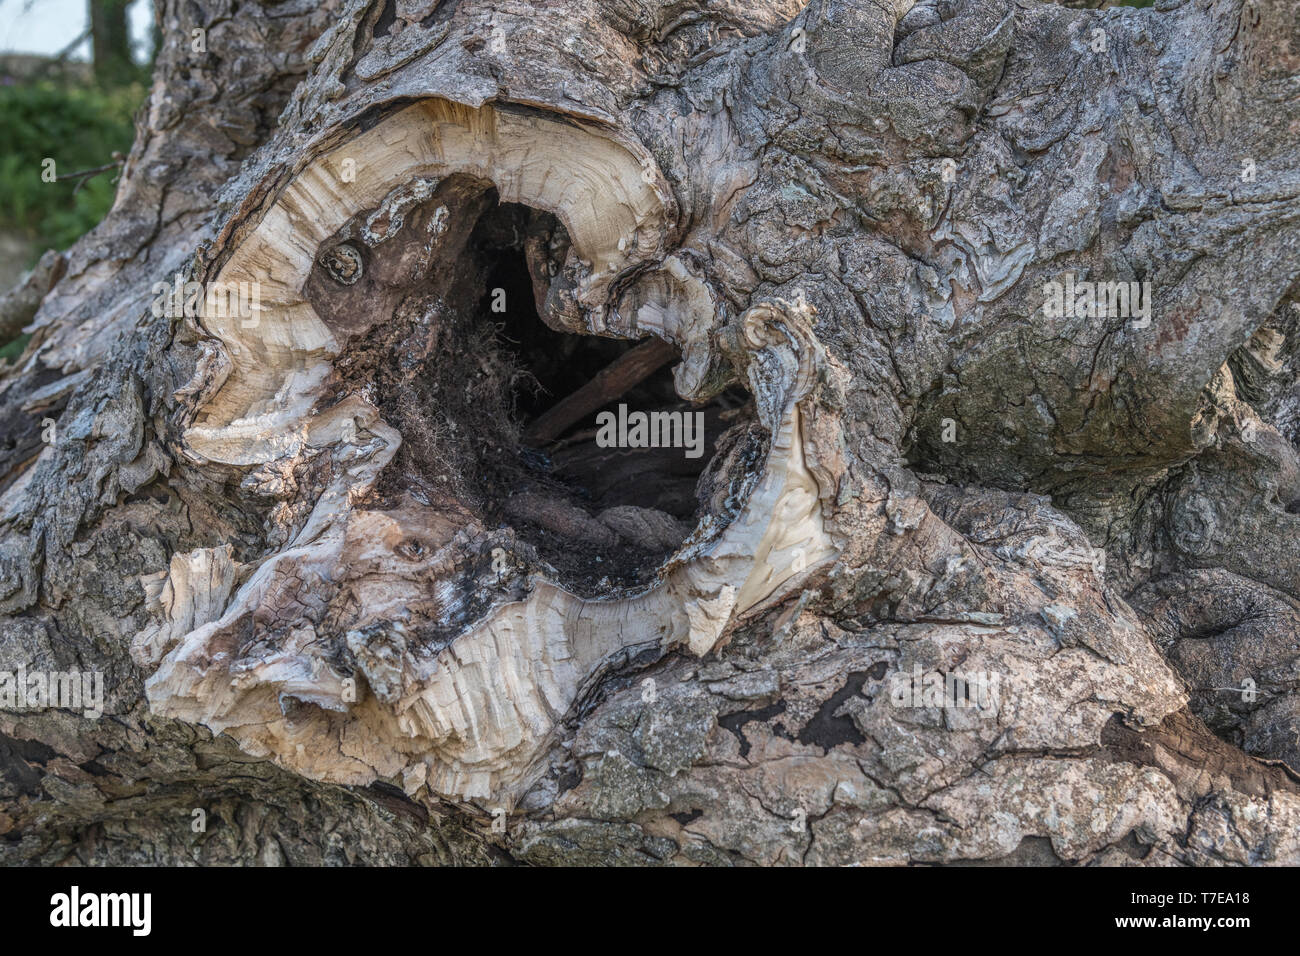 Collapsed rotten hollow tree trunk, showing rotten interior where a major branch has broken off. Metaphor 'rotten to the core', corruption. Stock Photo